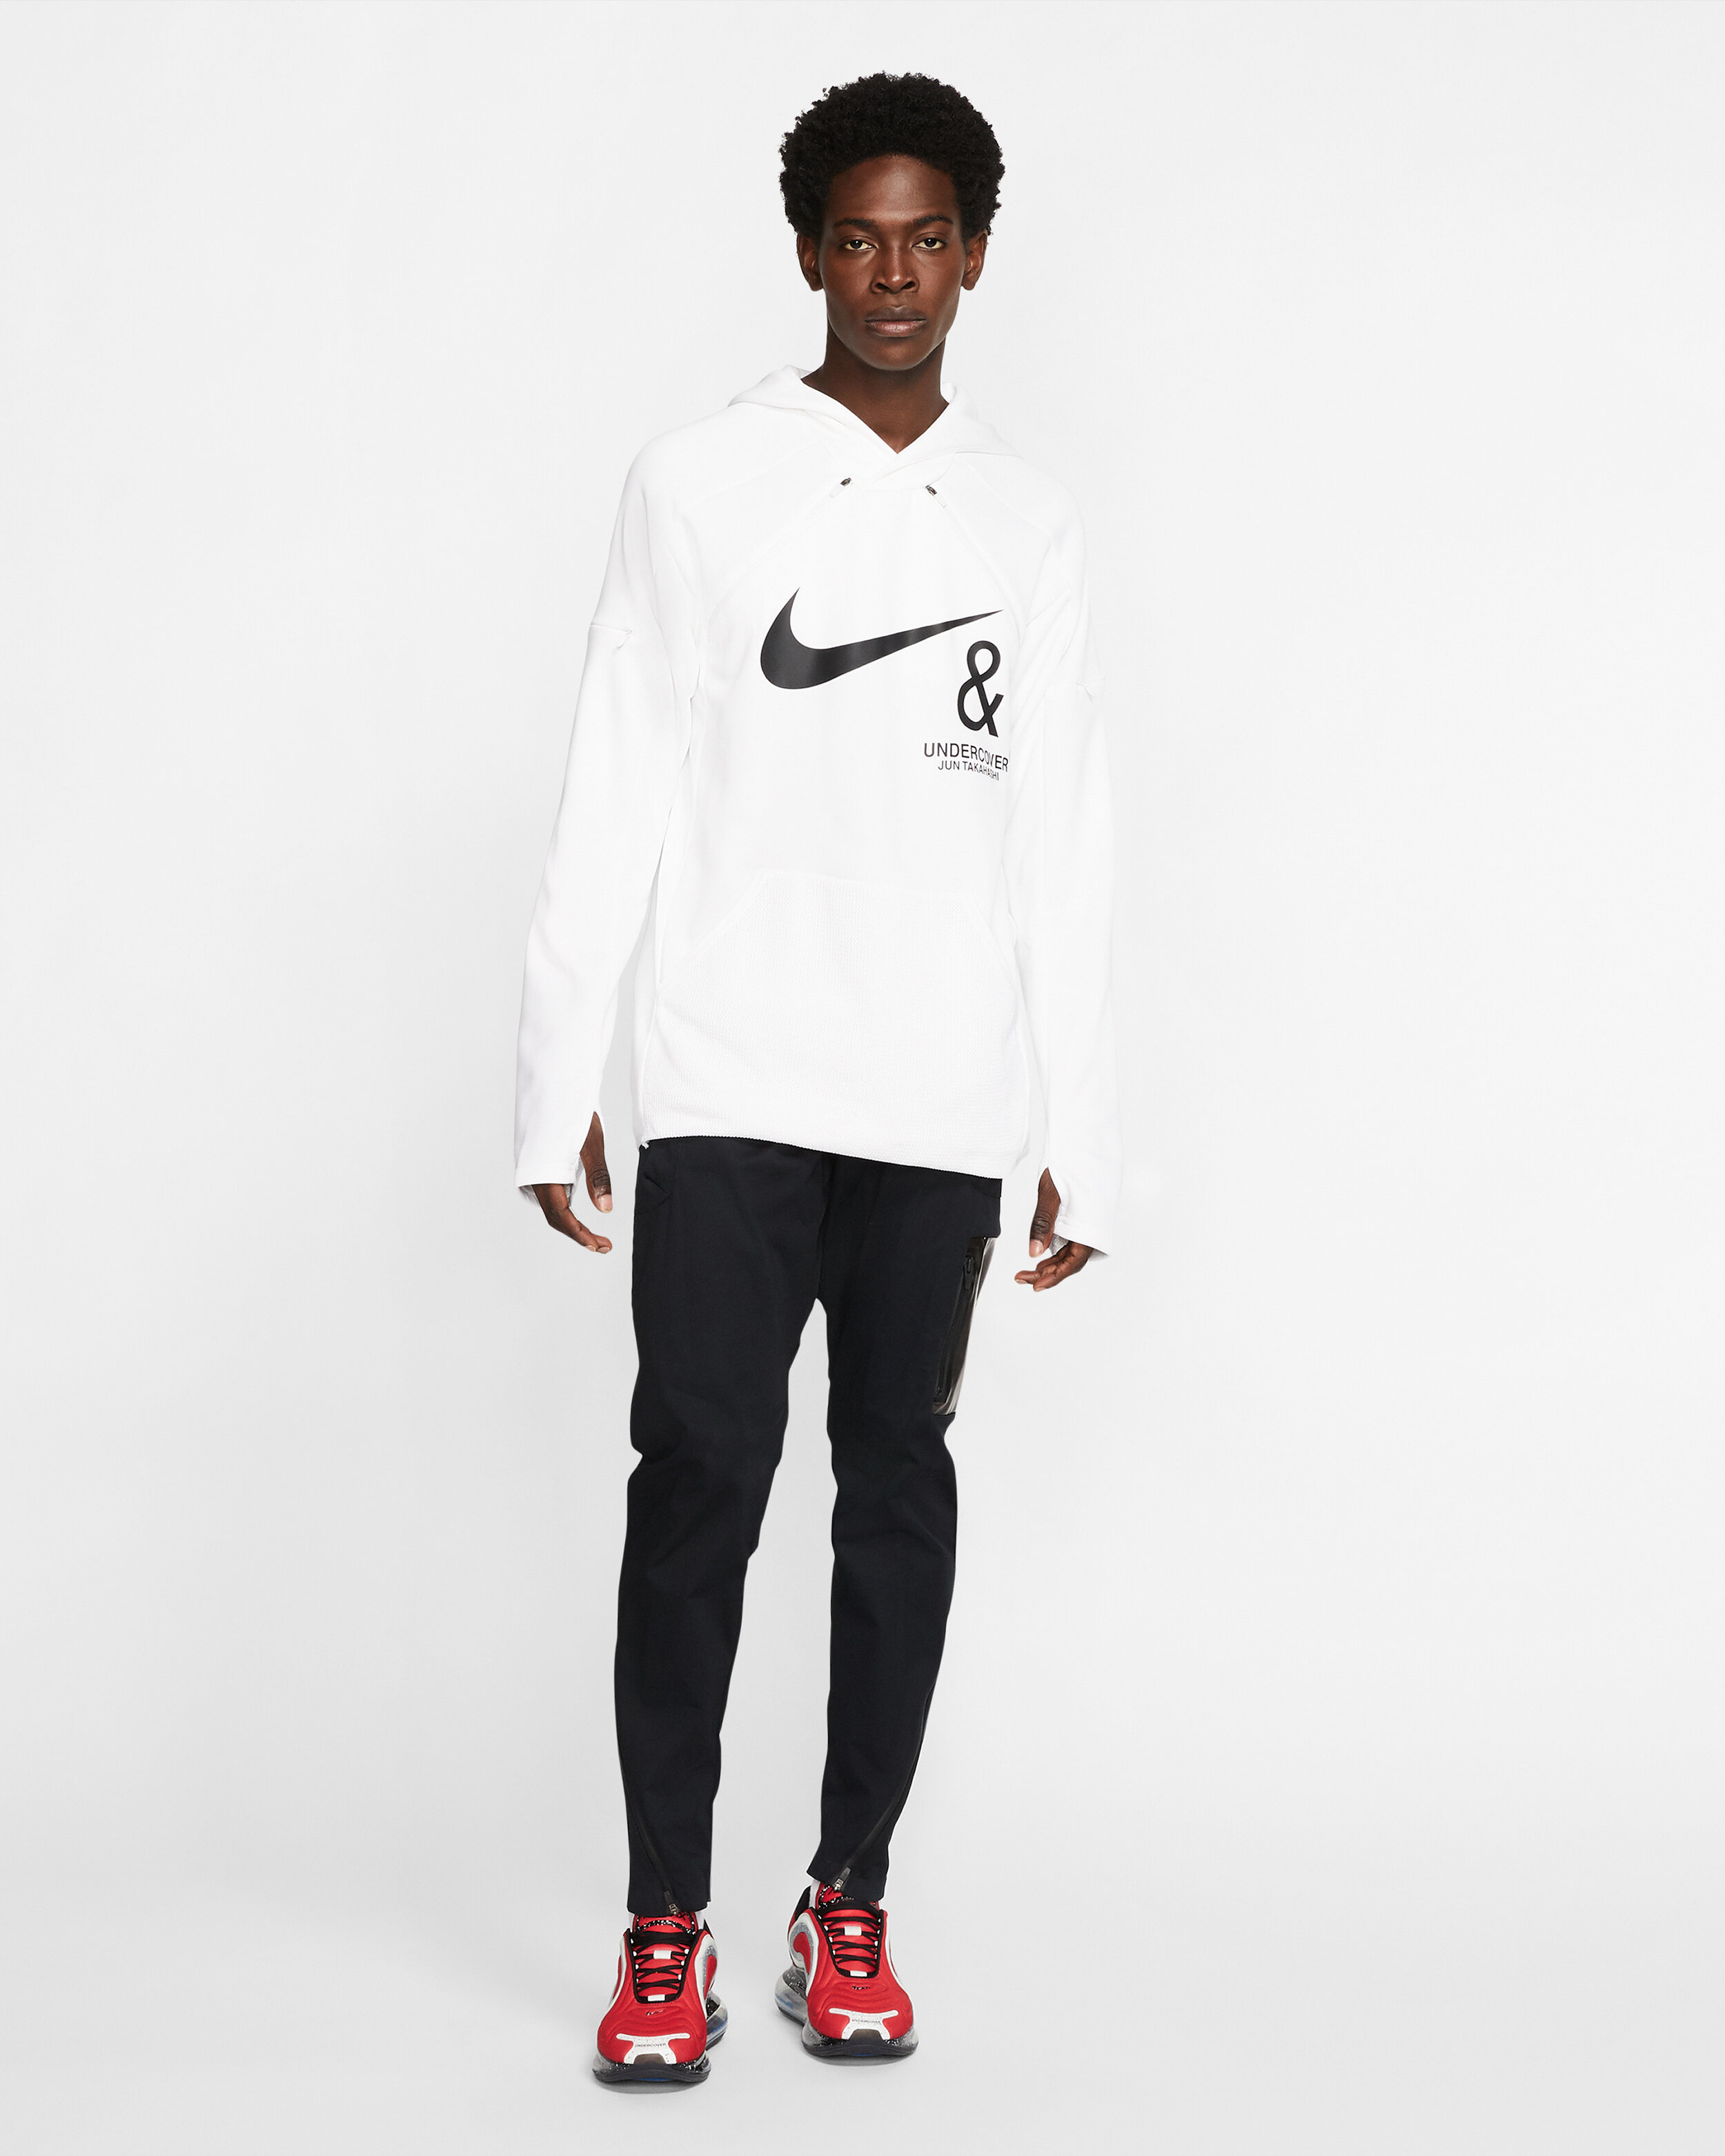 nike-x-undercover-winter-collection-58_92091.jpg